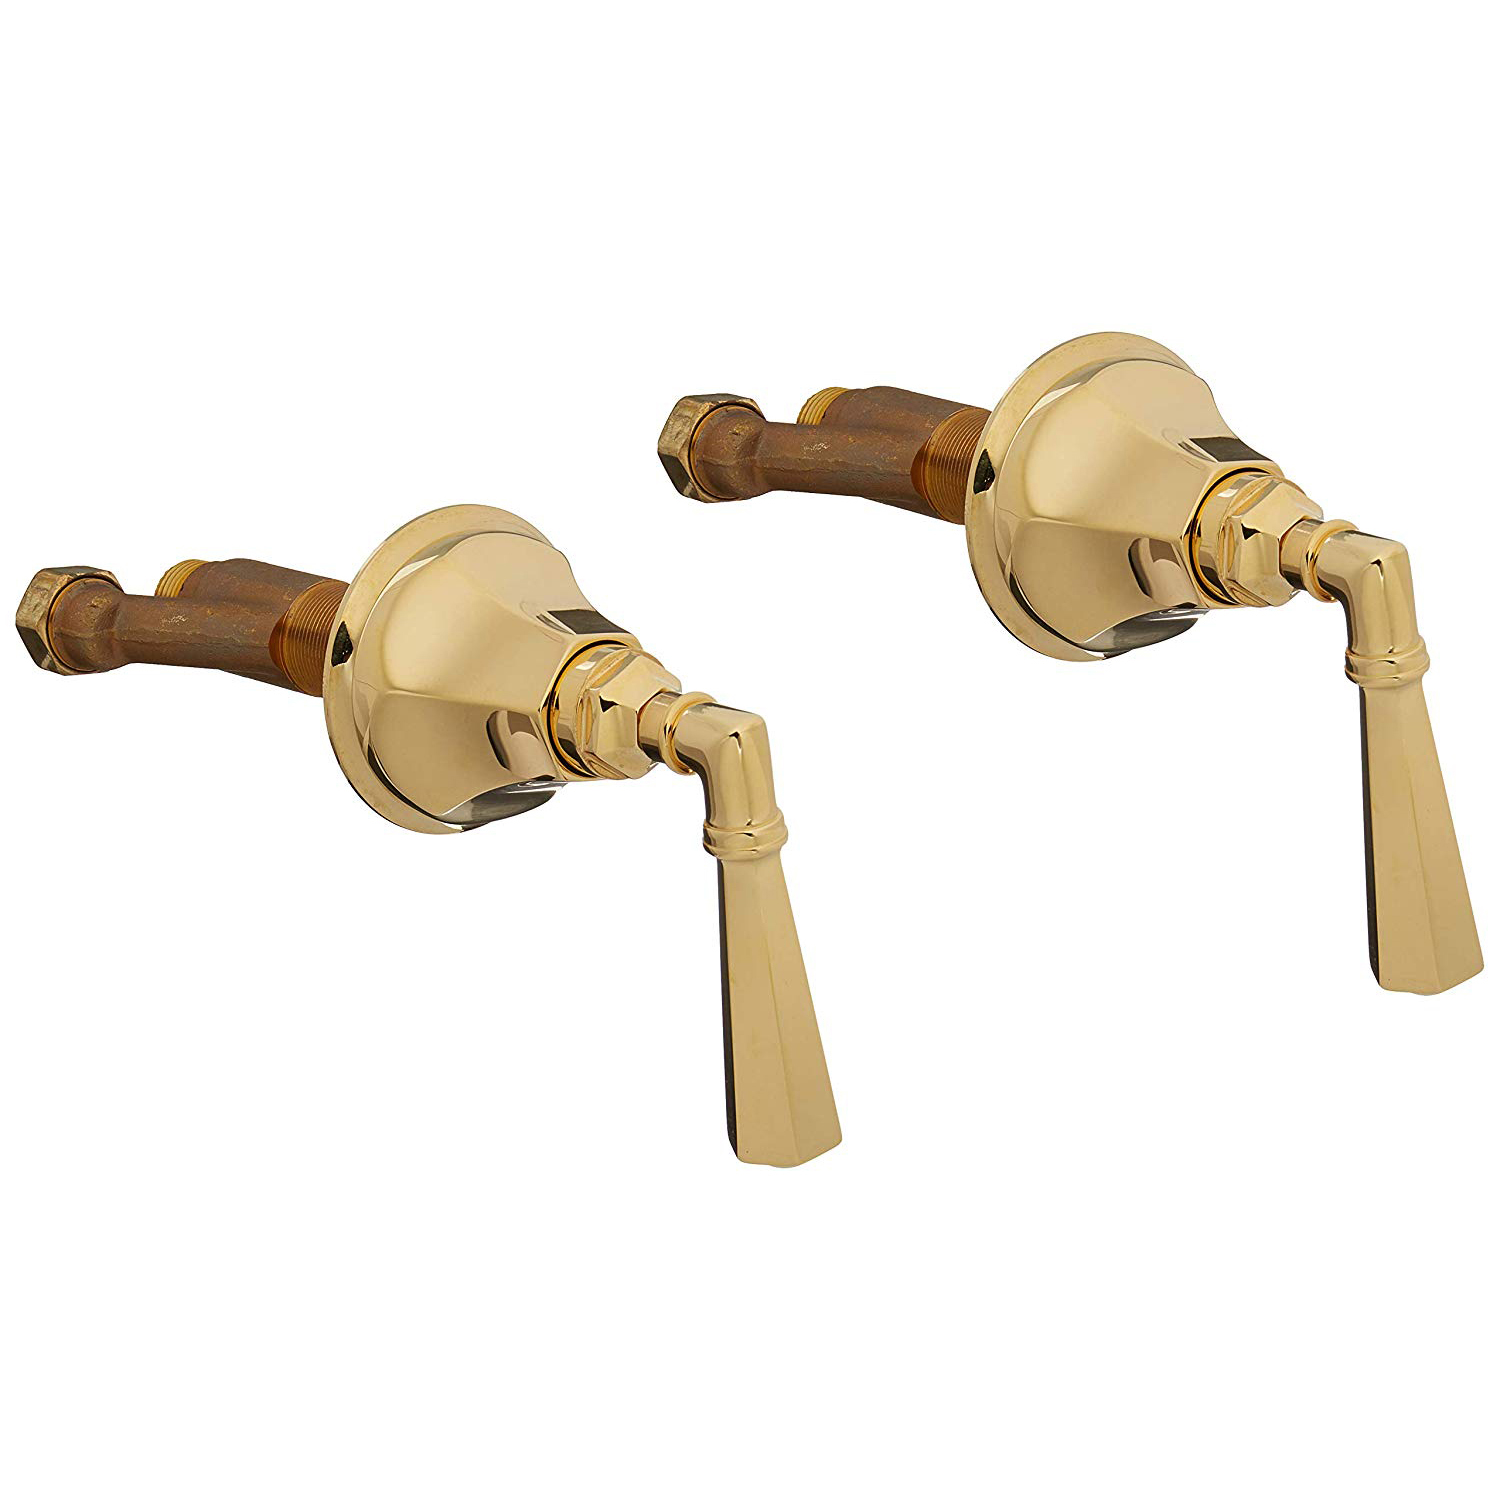 Palladian Deck Mounted Sidevalves Hot And Cold In Italian Brass